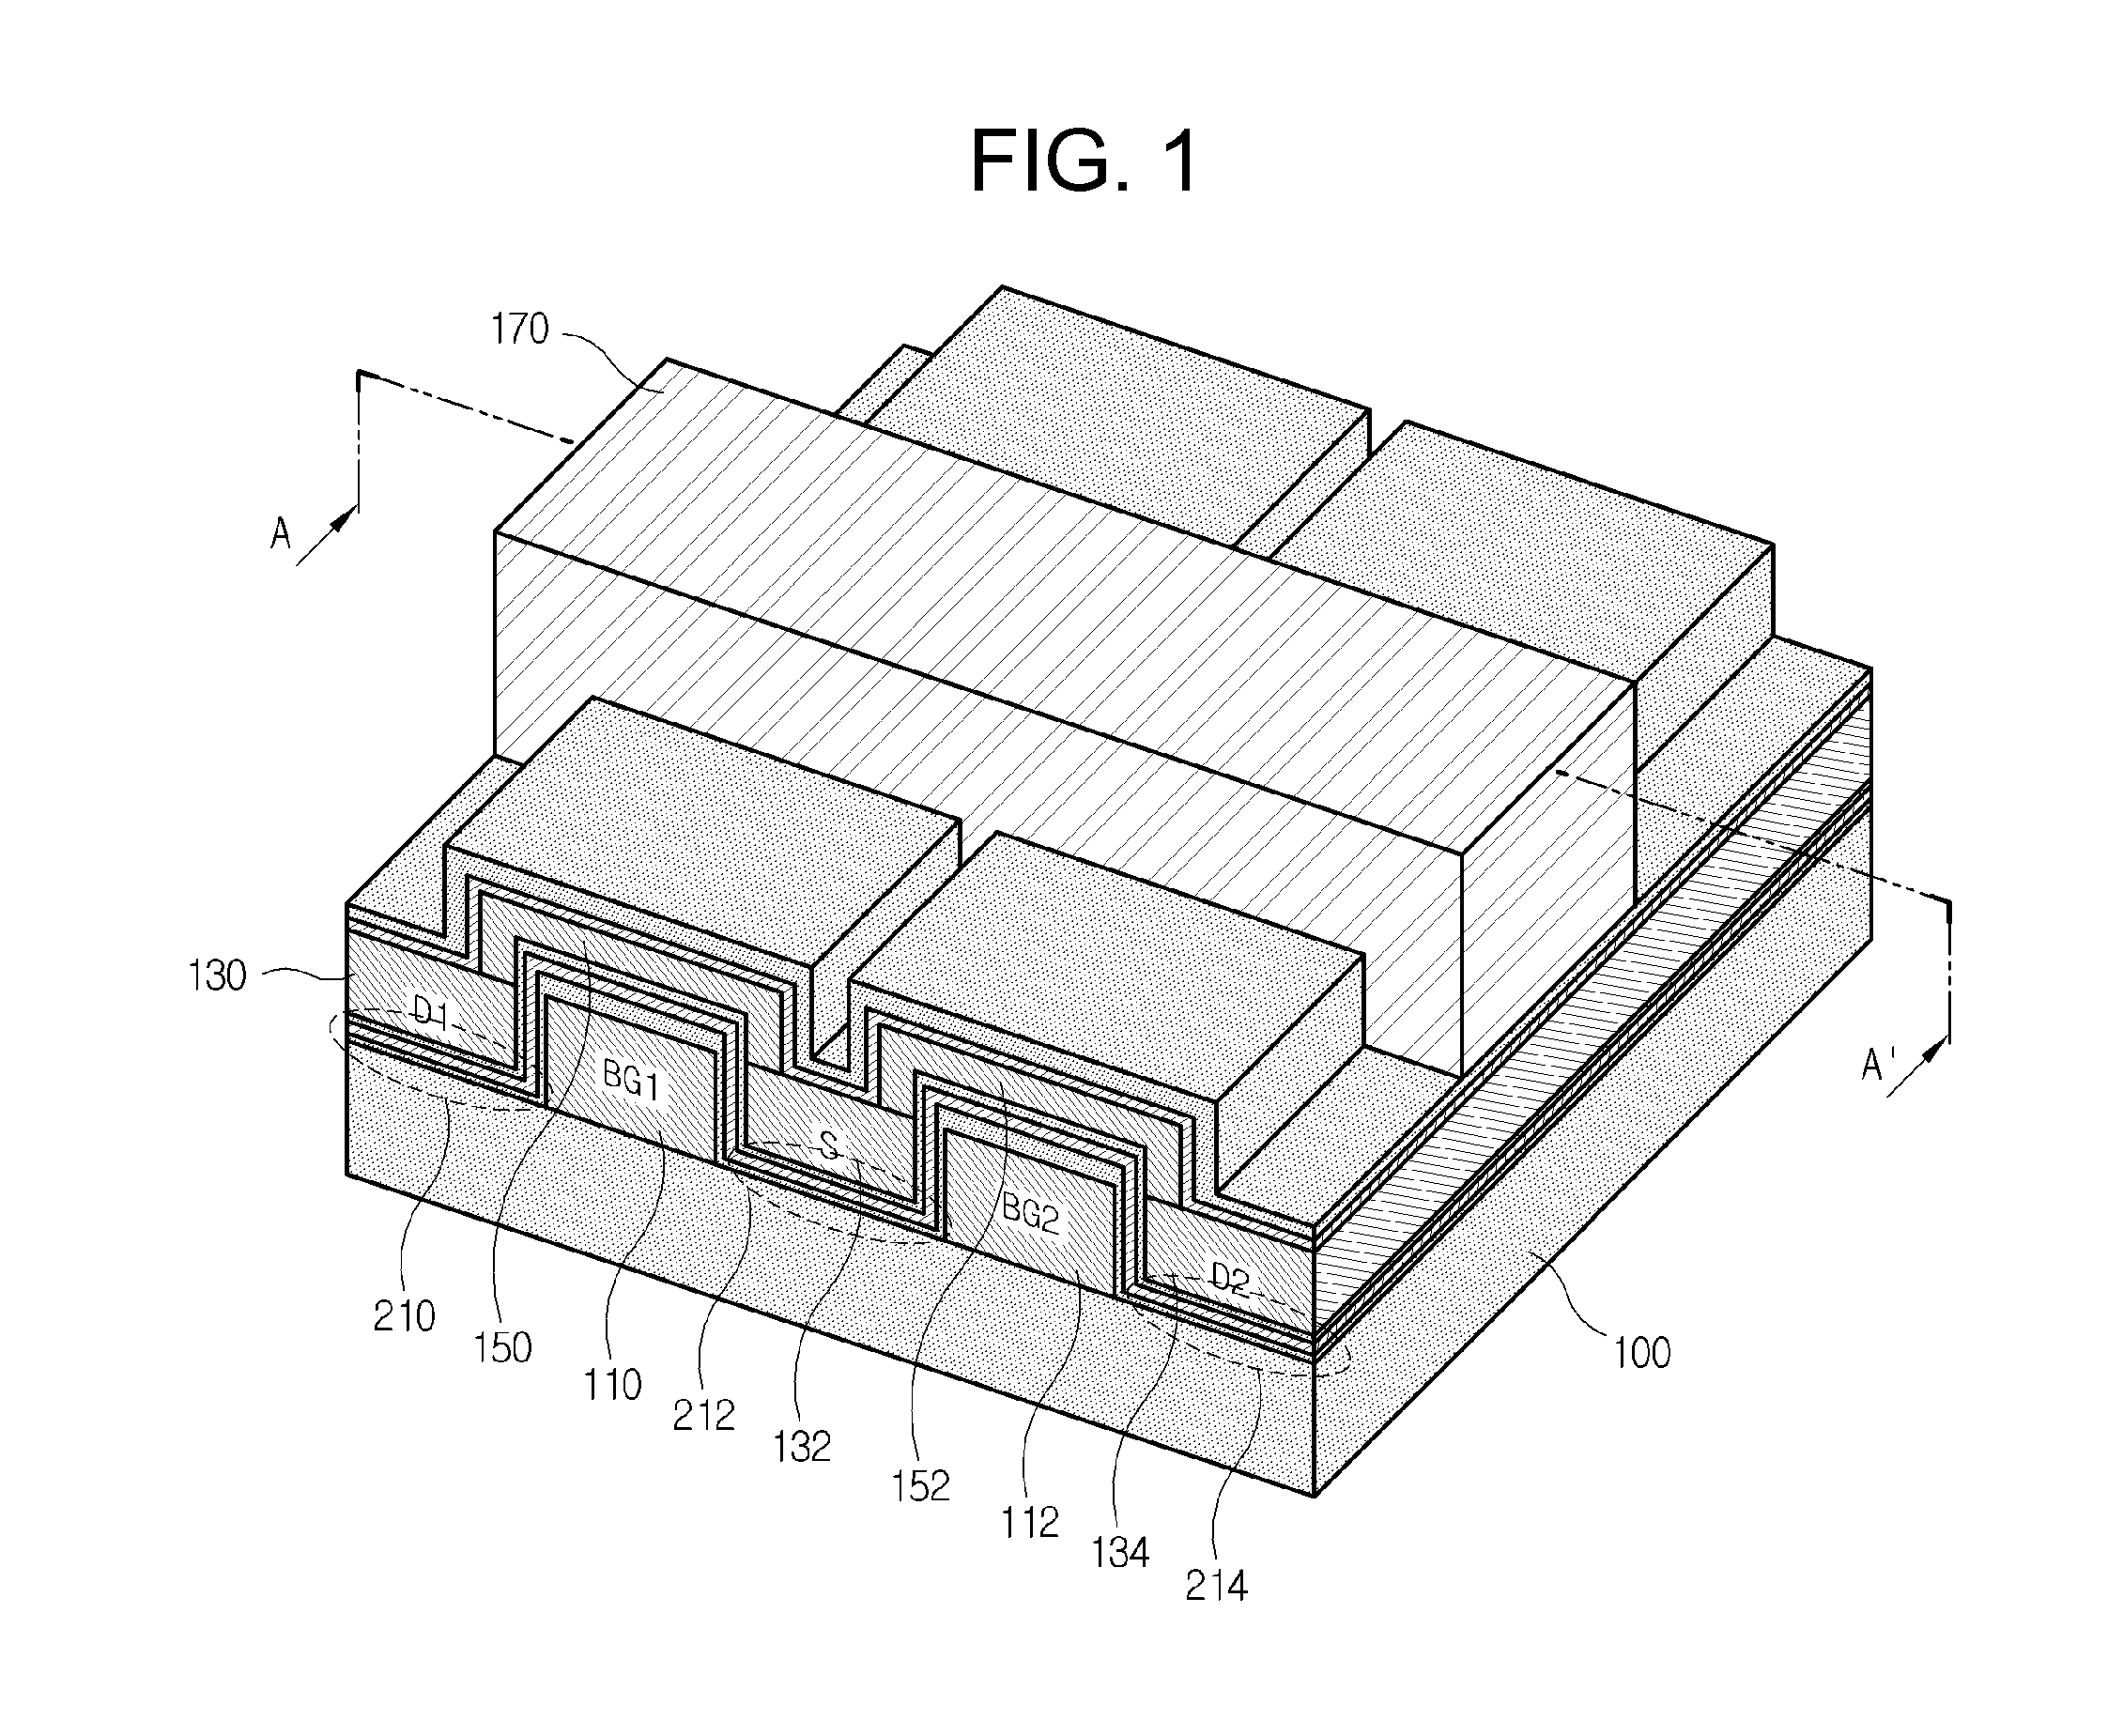 Neuromorphic device with excitatory and inhibitory functionalities